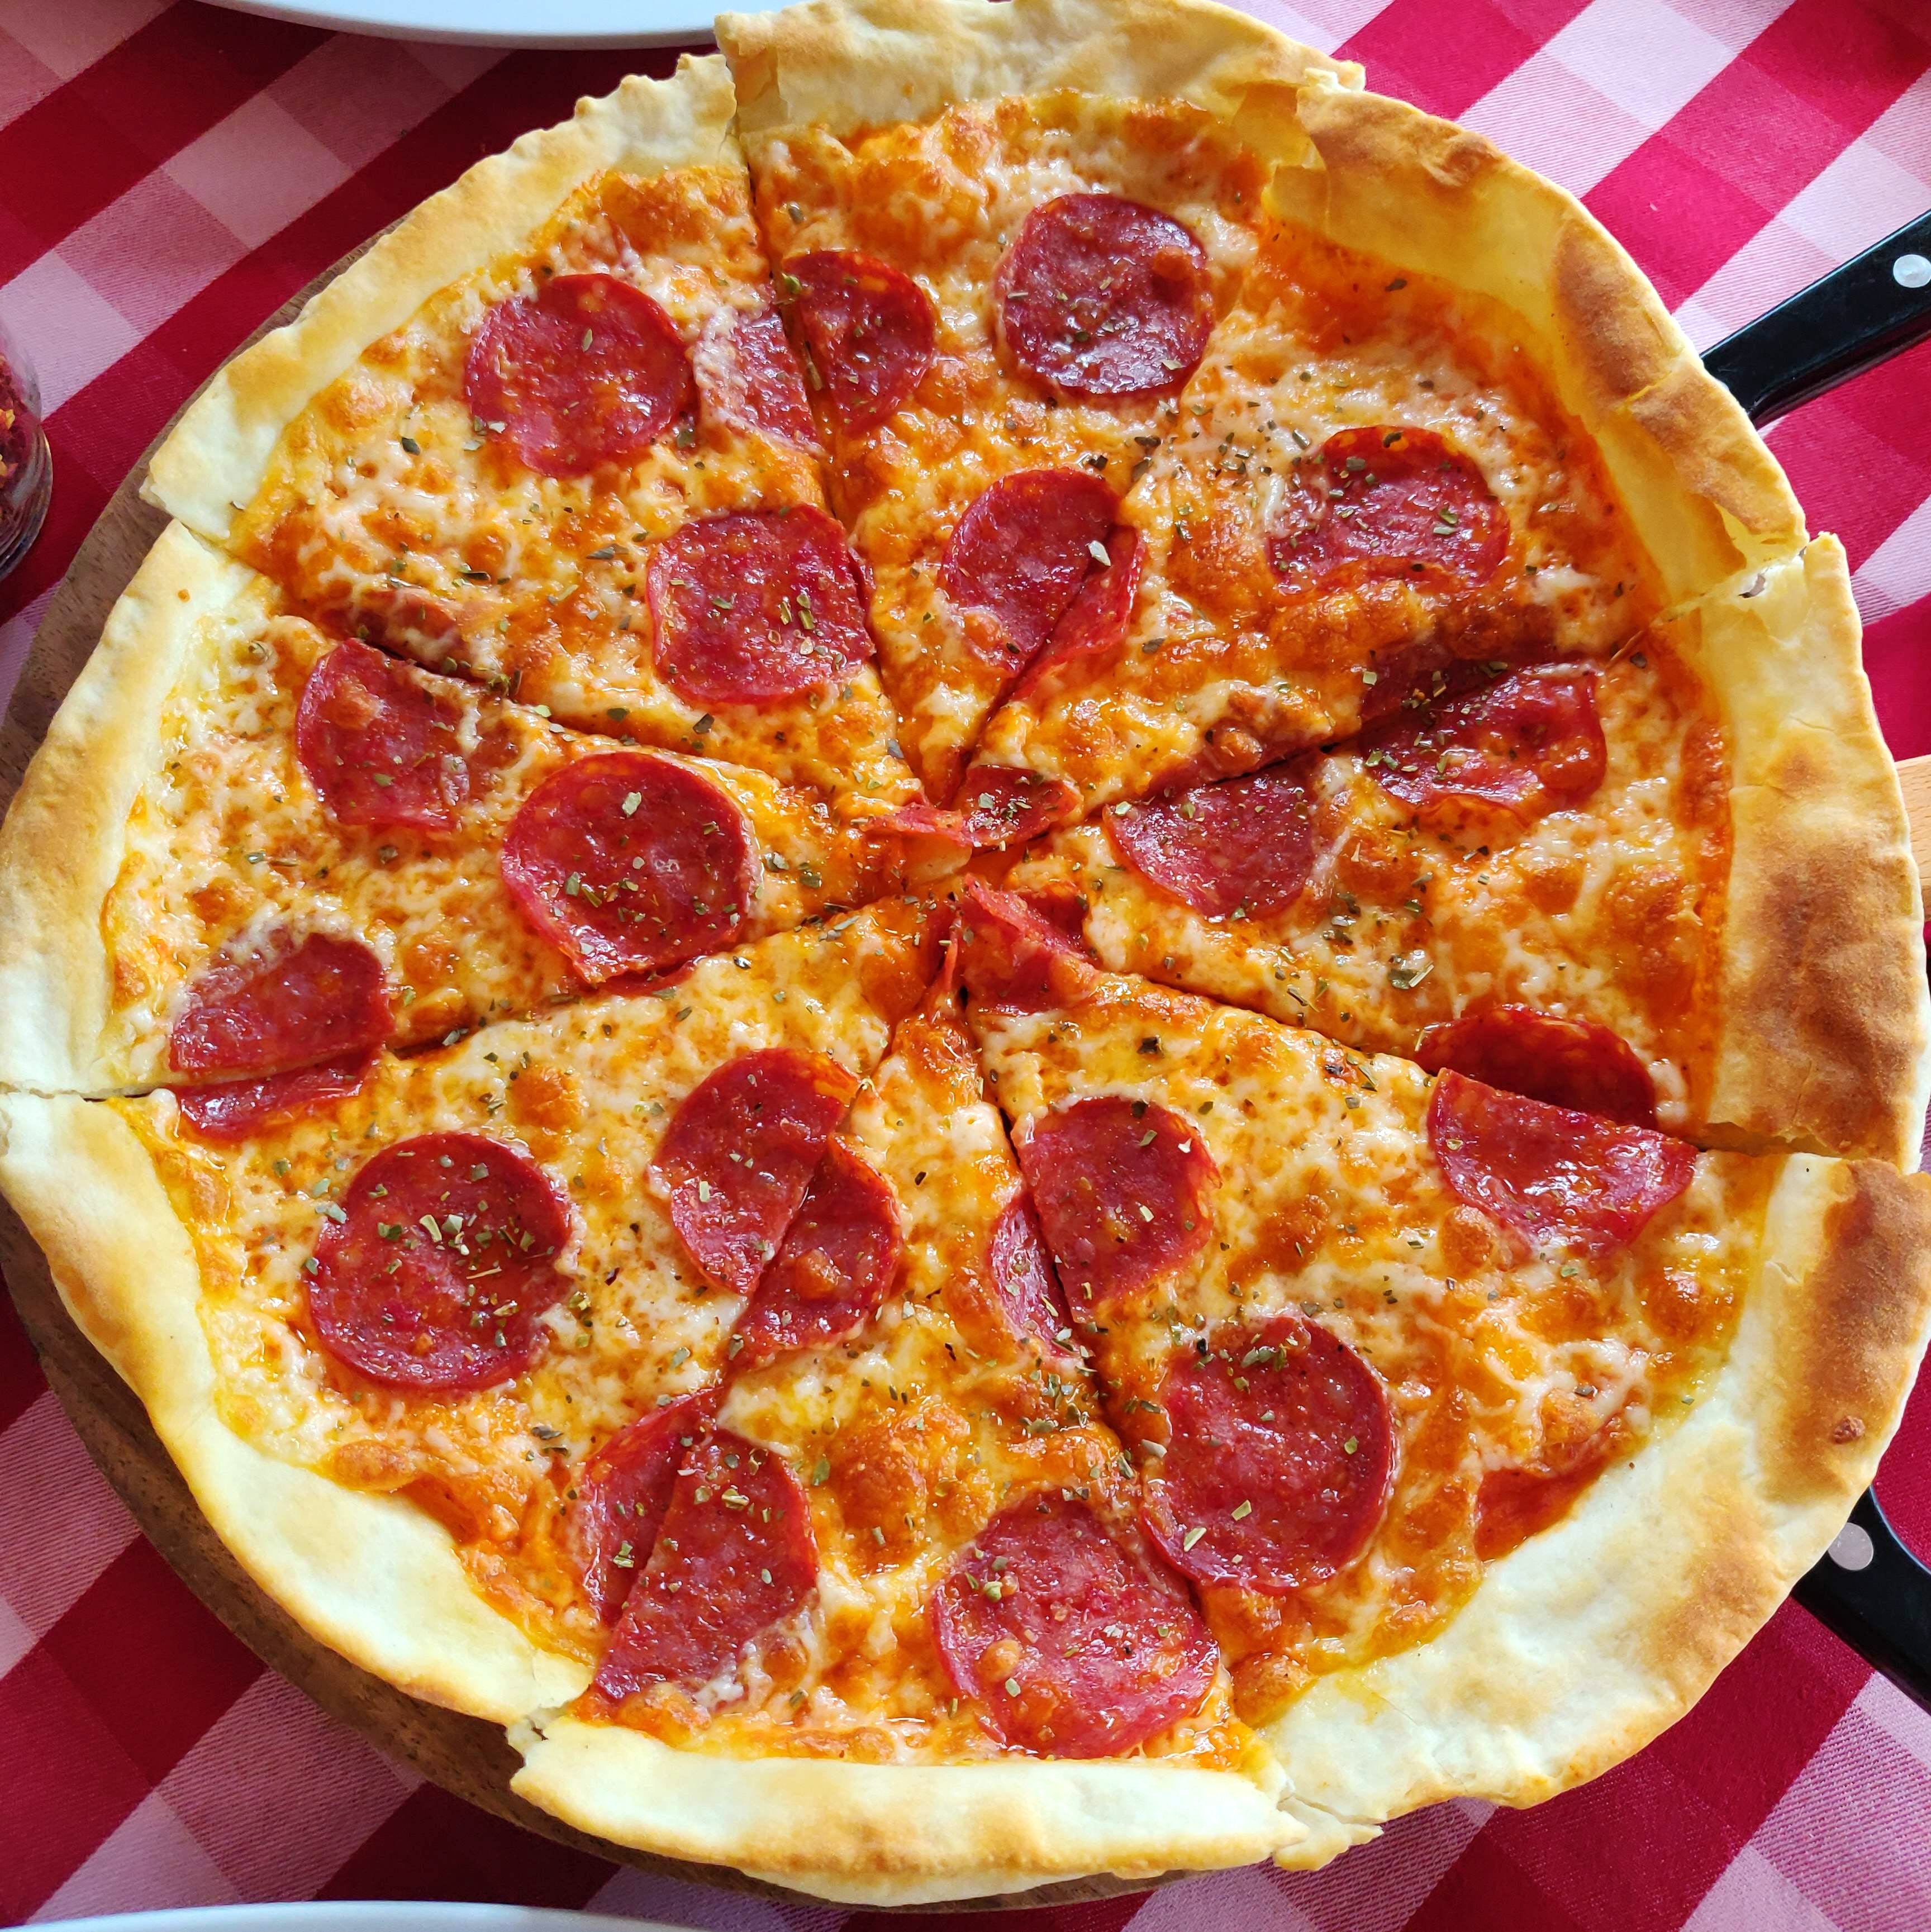 Dish,Food,Pizza,Cuisine,Pepperoni,Pizza cheese,California-style pizza,Ingredient,Junk food,Sicilian pizza